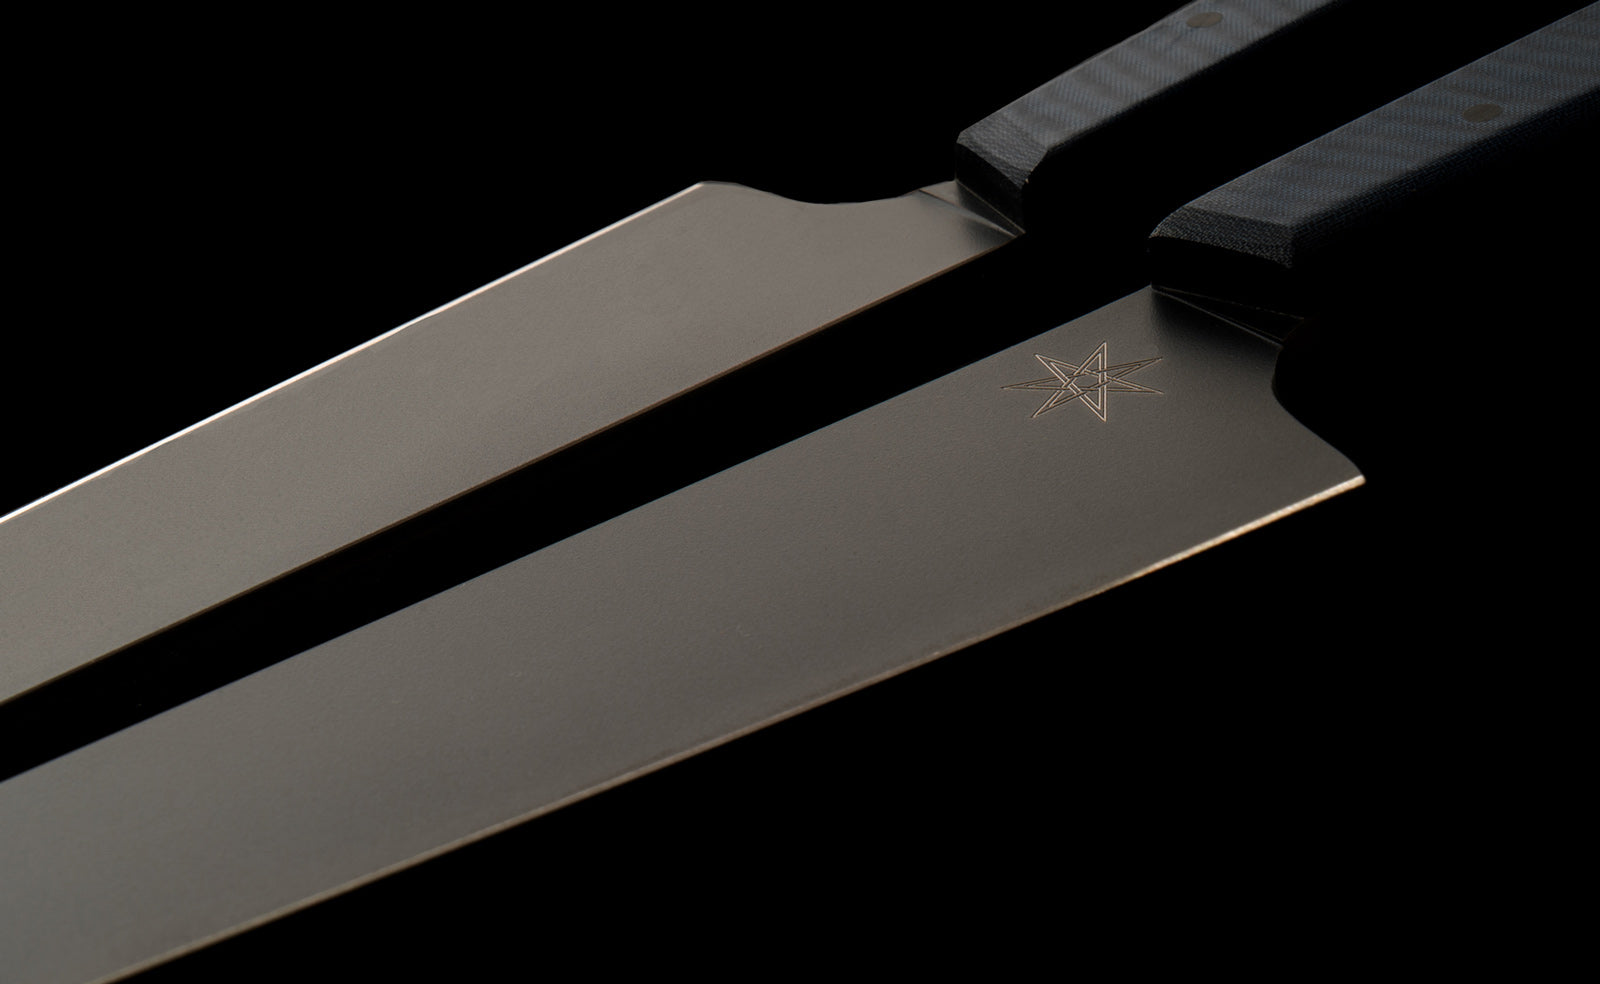 Close-up detail photo of two Town Cutler eXo Blue Slicer Carving Knives